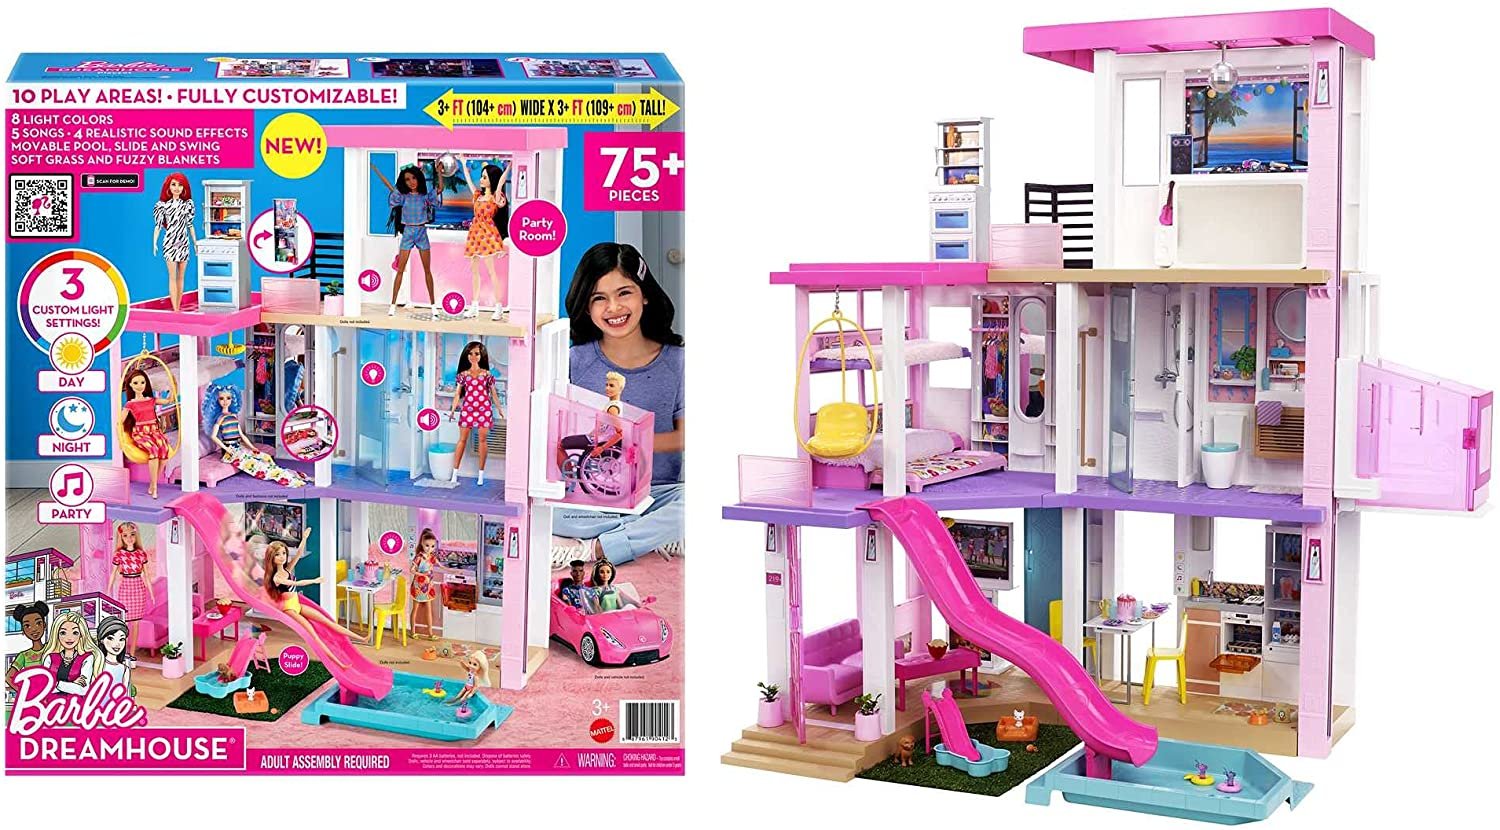 Barbie Dreamhouse (3.75-ft) 3-Story Dollhouse Playset with Pool & Slide, Lights & Sounds, 75+ Pieces